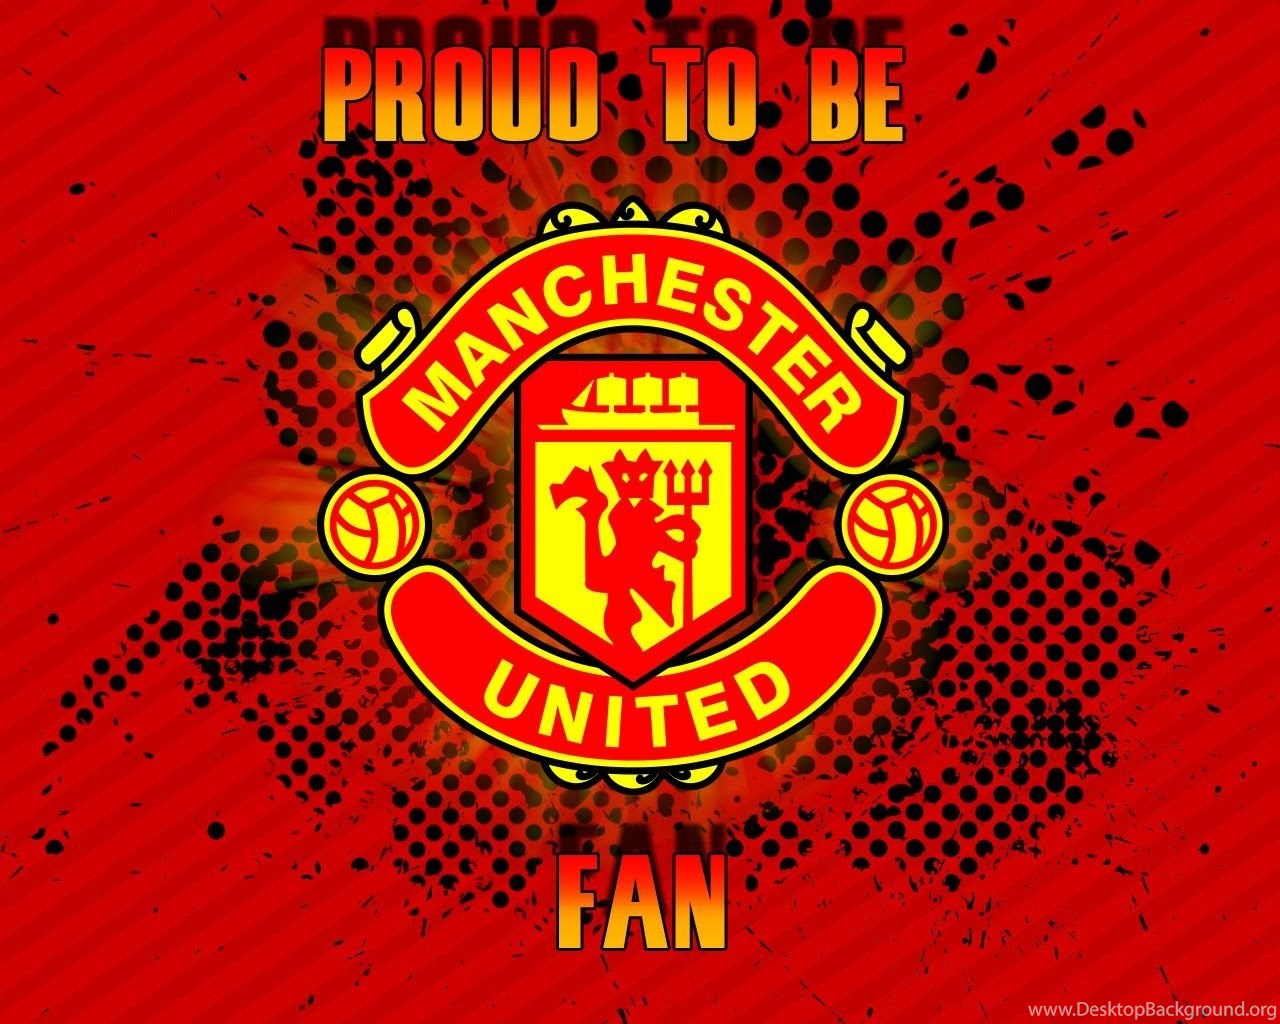 Manchester United Logo Wallpapers Hd 2015 Wallpapers Cave Desktop